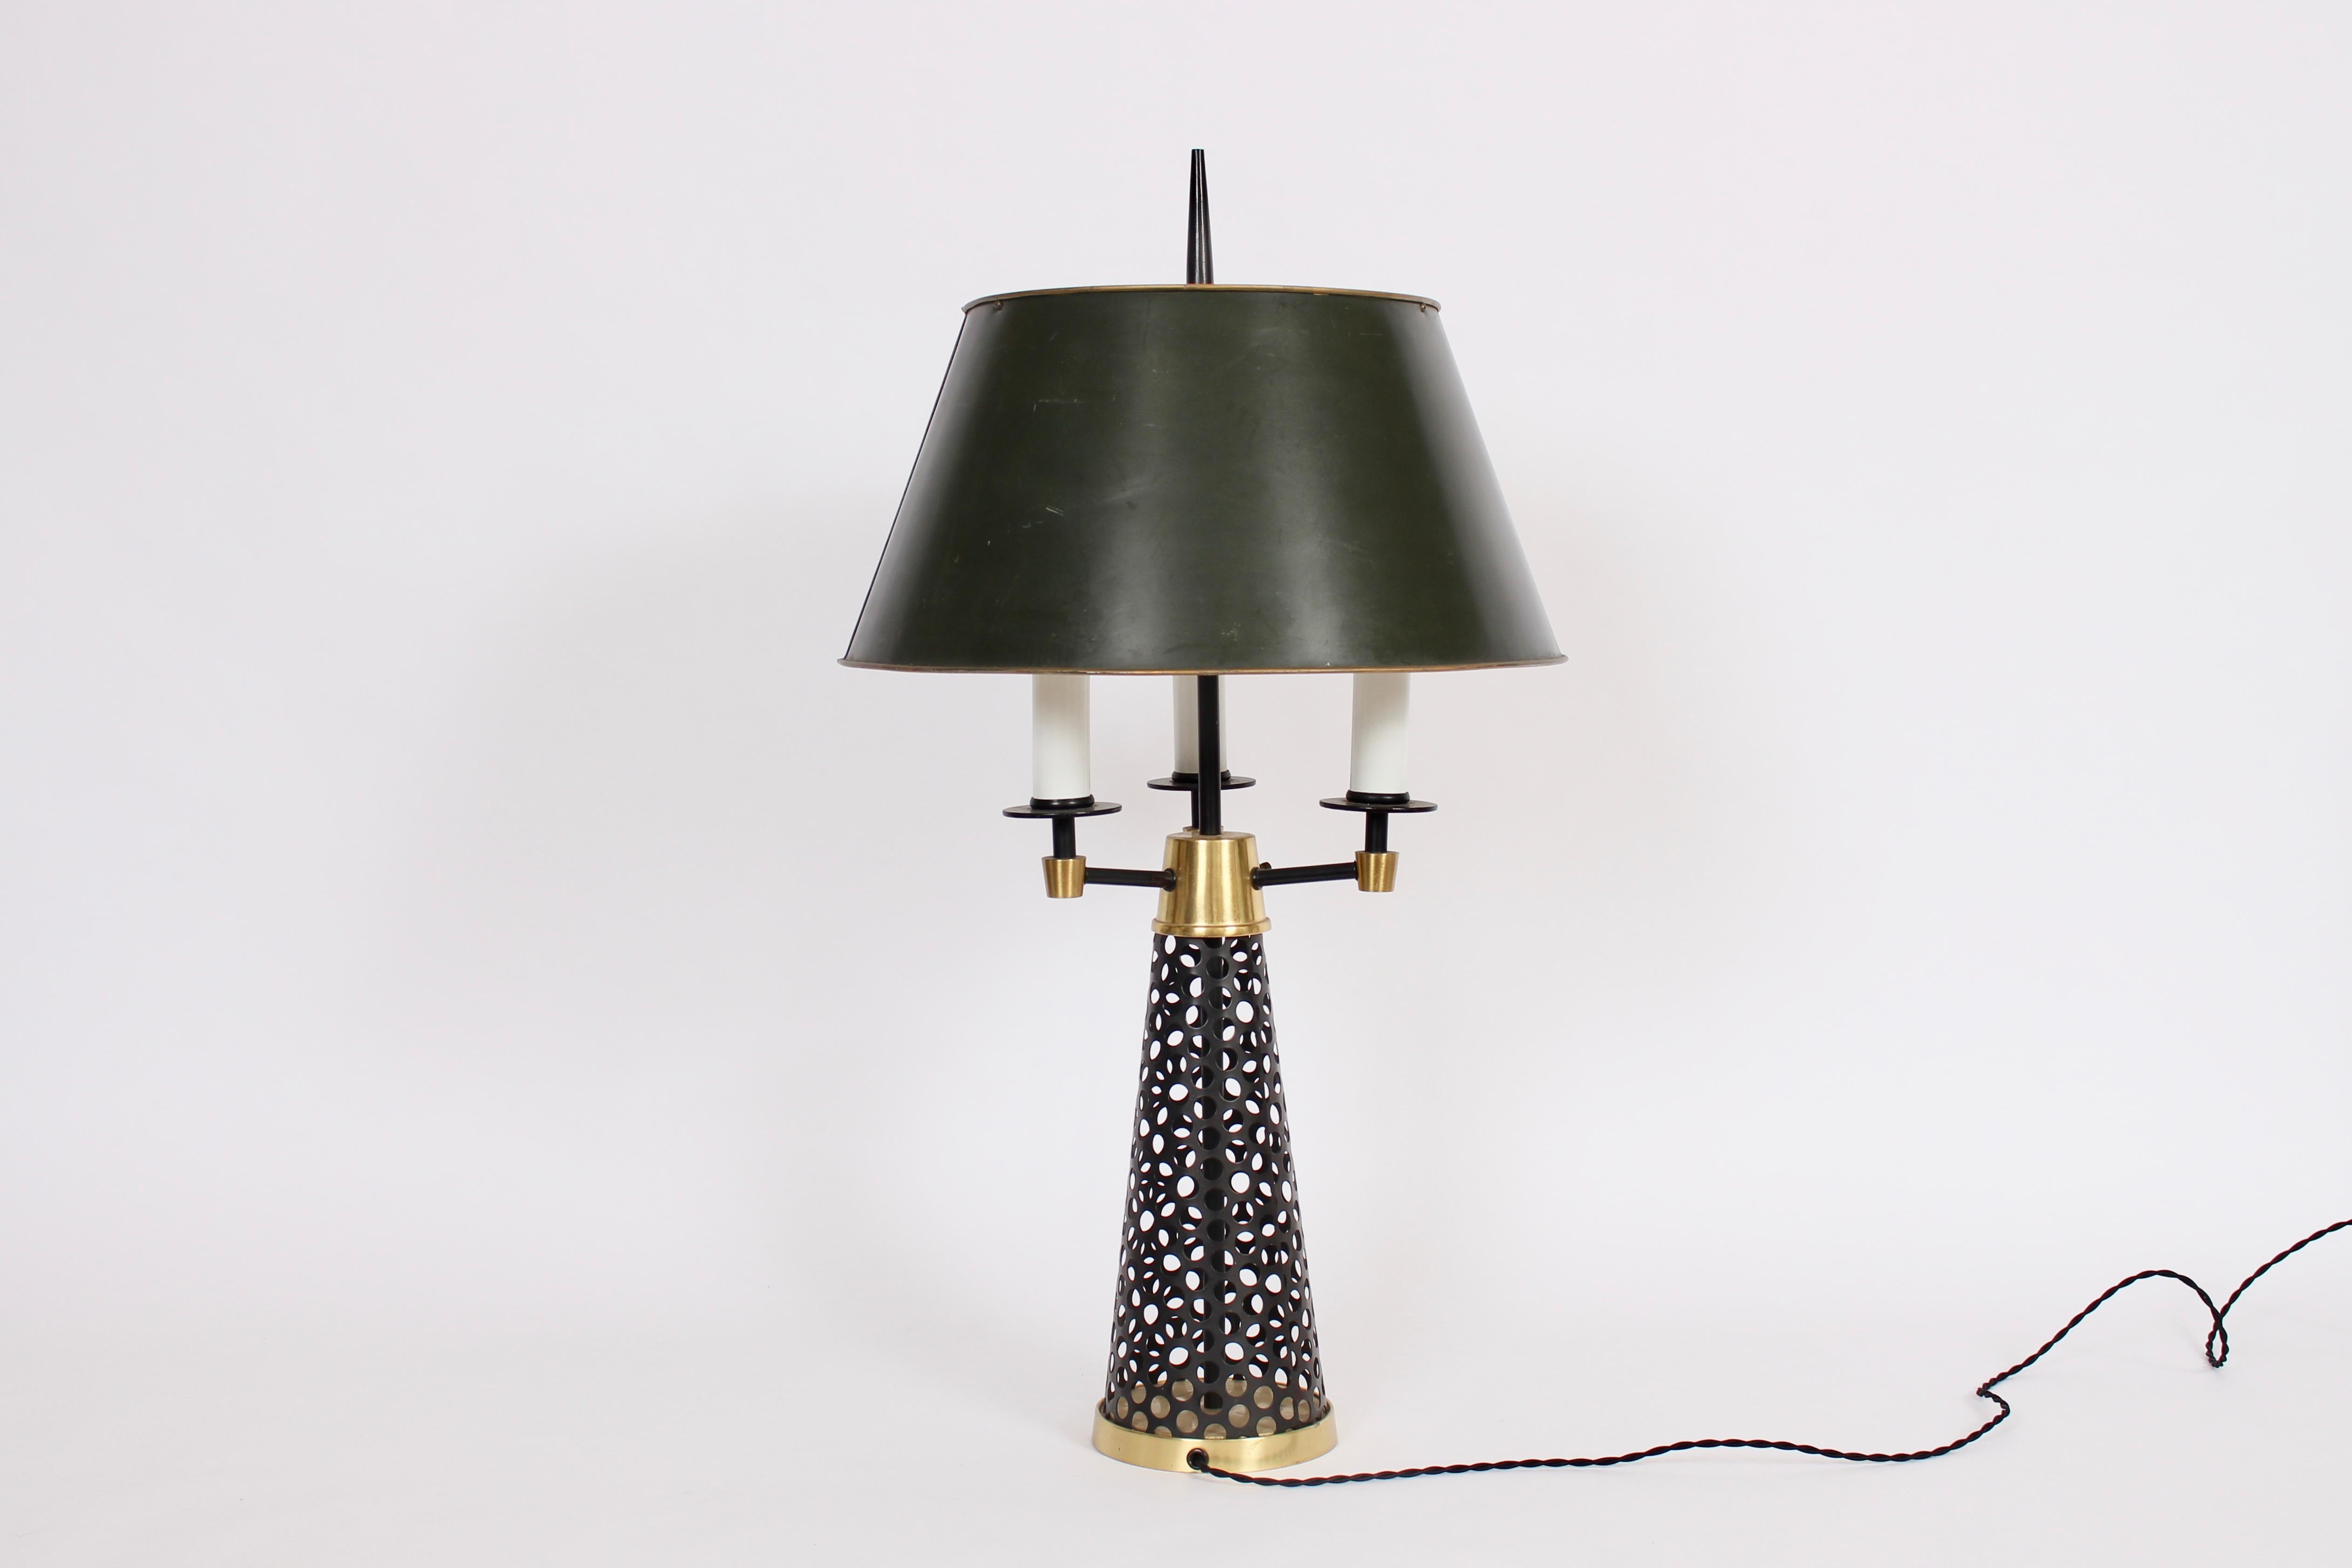 Tall perforated Black Cone, Three Candlestick & Brass Table Lamp, 1950's. In the manner of Tony Paul.  Featuring a black enameled perforated cone framework, 3 white wrapped candlesticks with bright brass cap, arms and base. Three standard sockets.